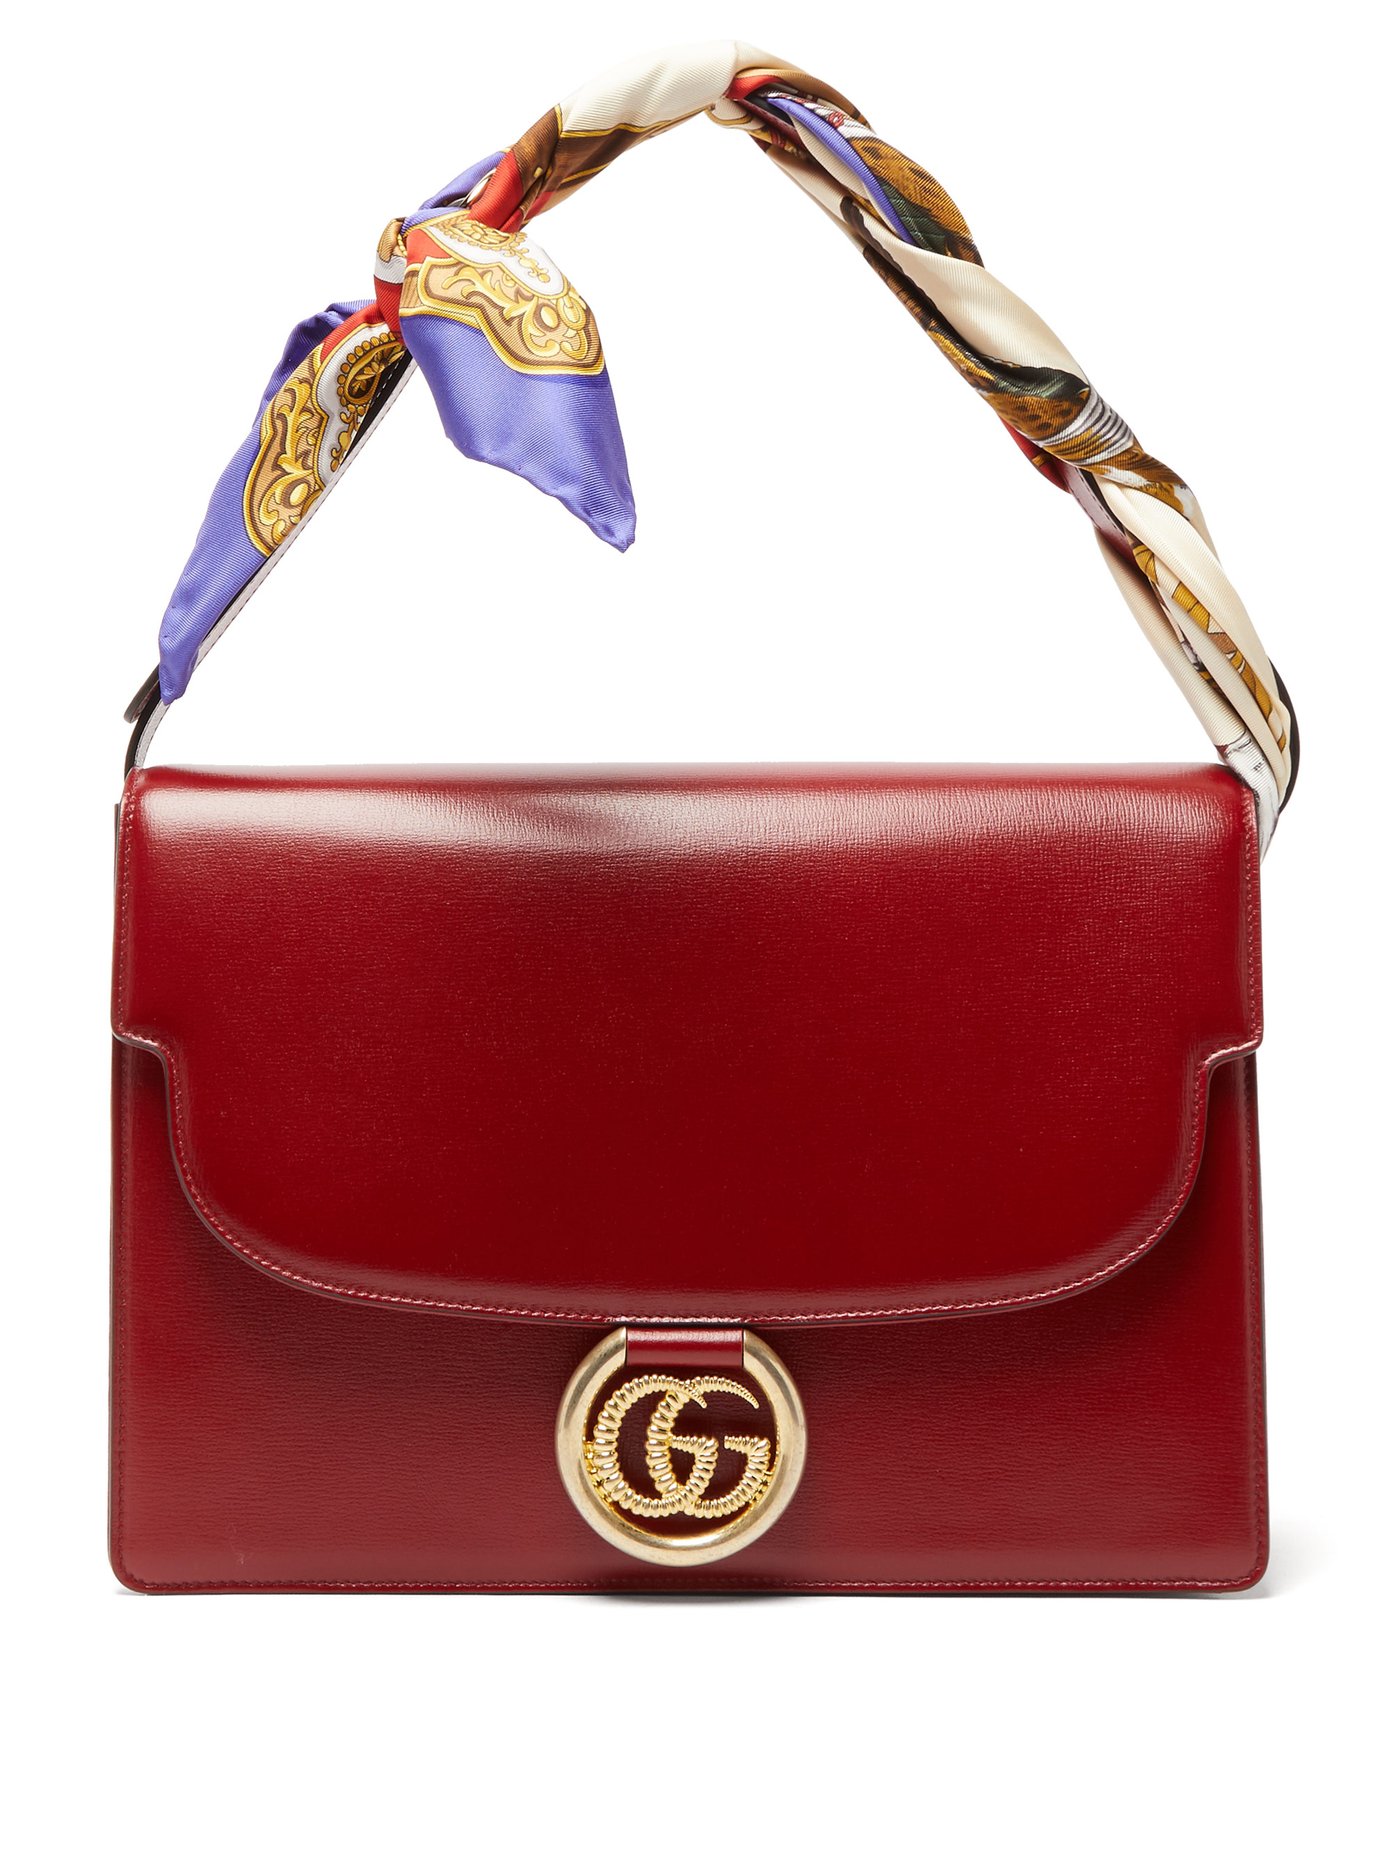 gucci red leather bag